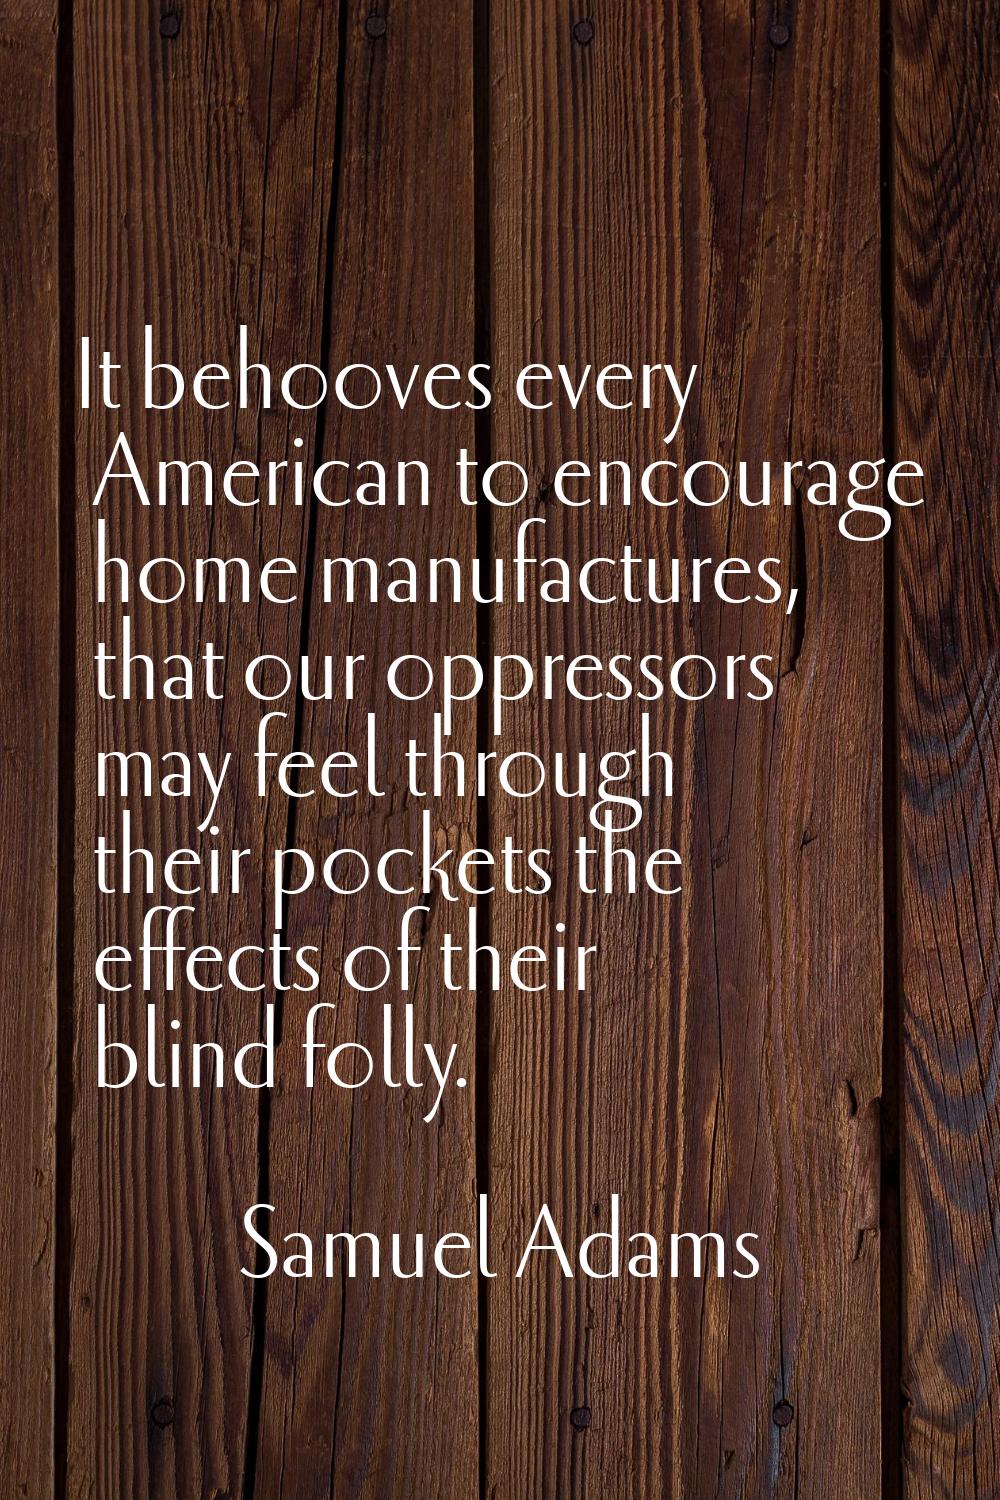 It behooves every American to encourage home manufactures, that our oppressors may feel through the